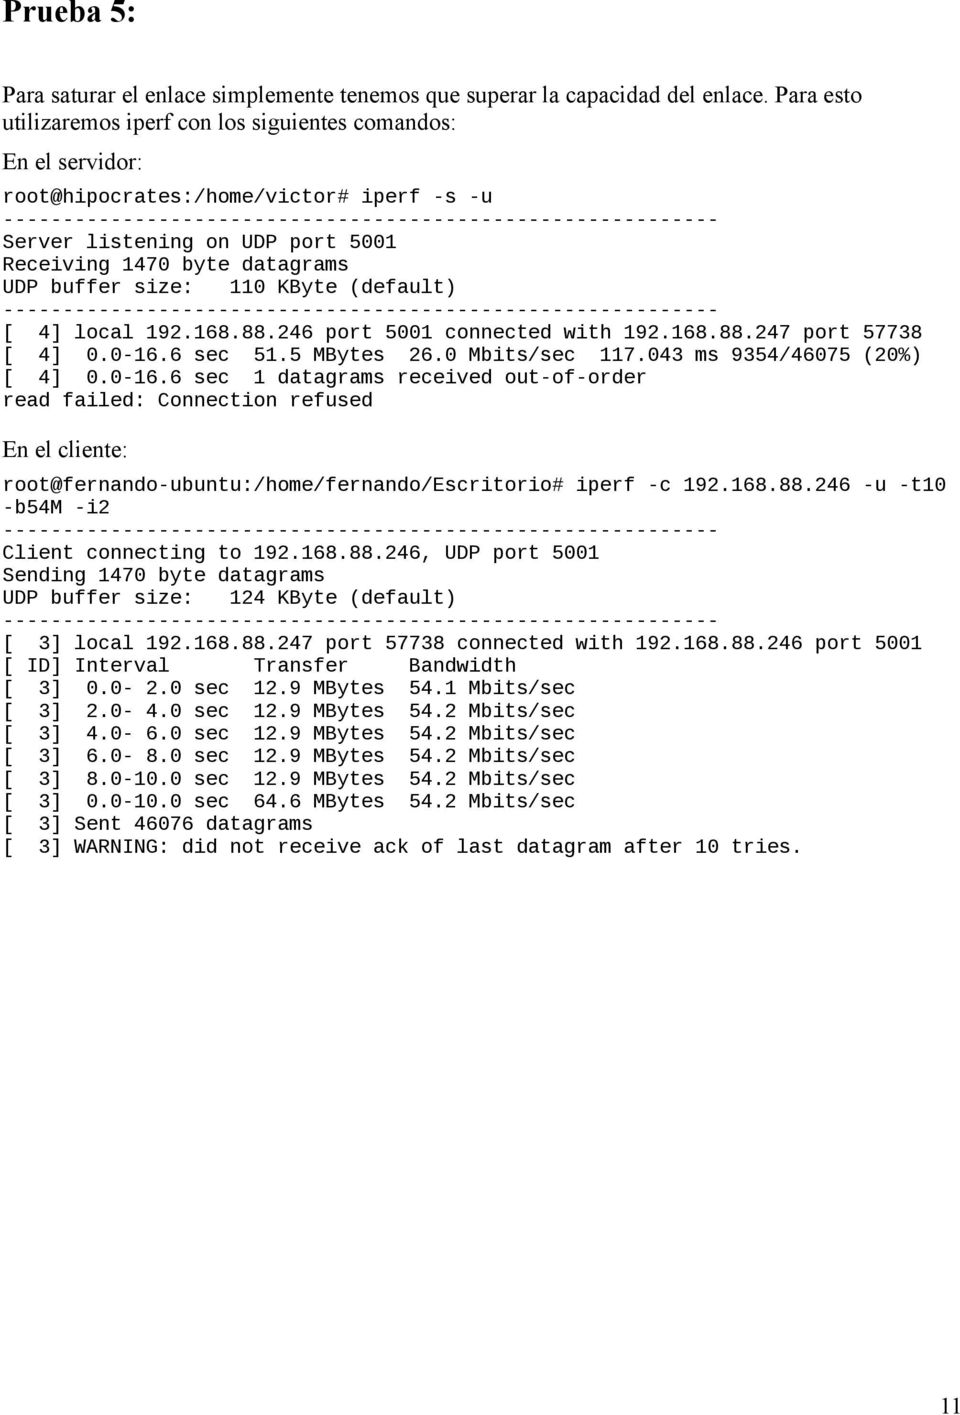 port 5001 Receiving 1470 byte datagrams UDP buffer size: 110 KByte (default) -----------------------------------------------------------[ 4] local 192.168.88.246 port 5001 connected with 192.168.88.247 port 57738 [ 4] 0.